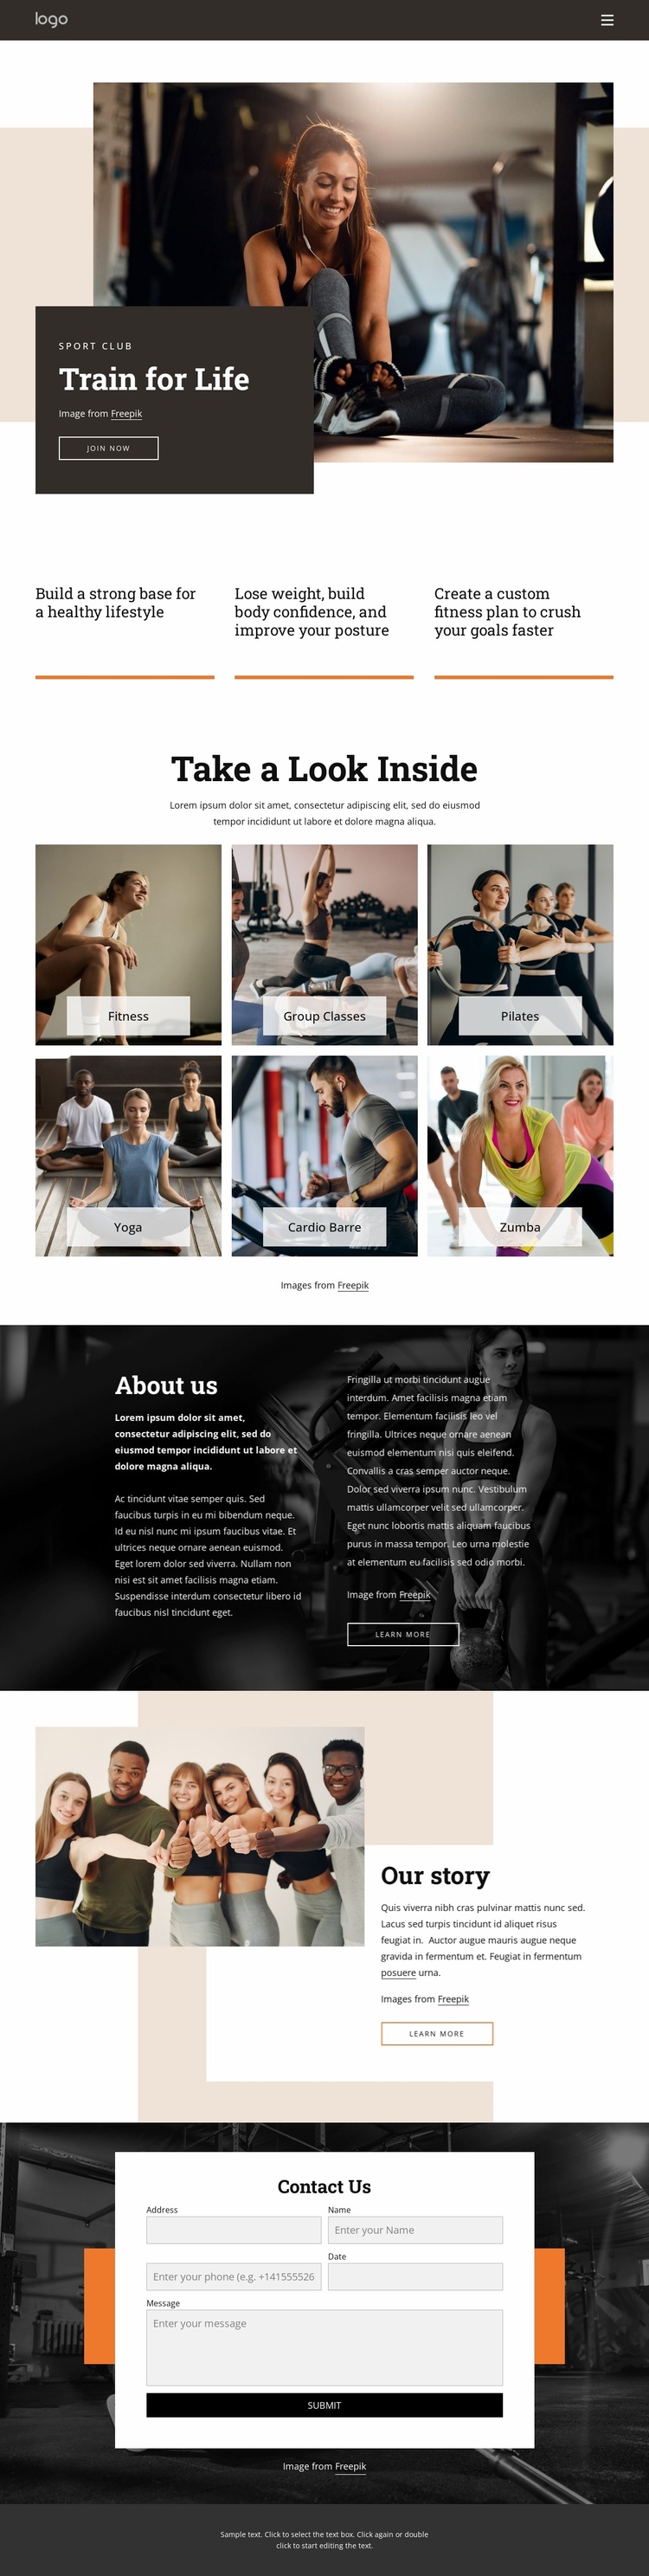 Get moving with our range of classes Website Template